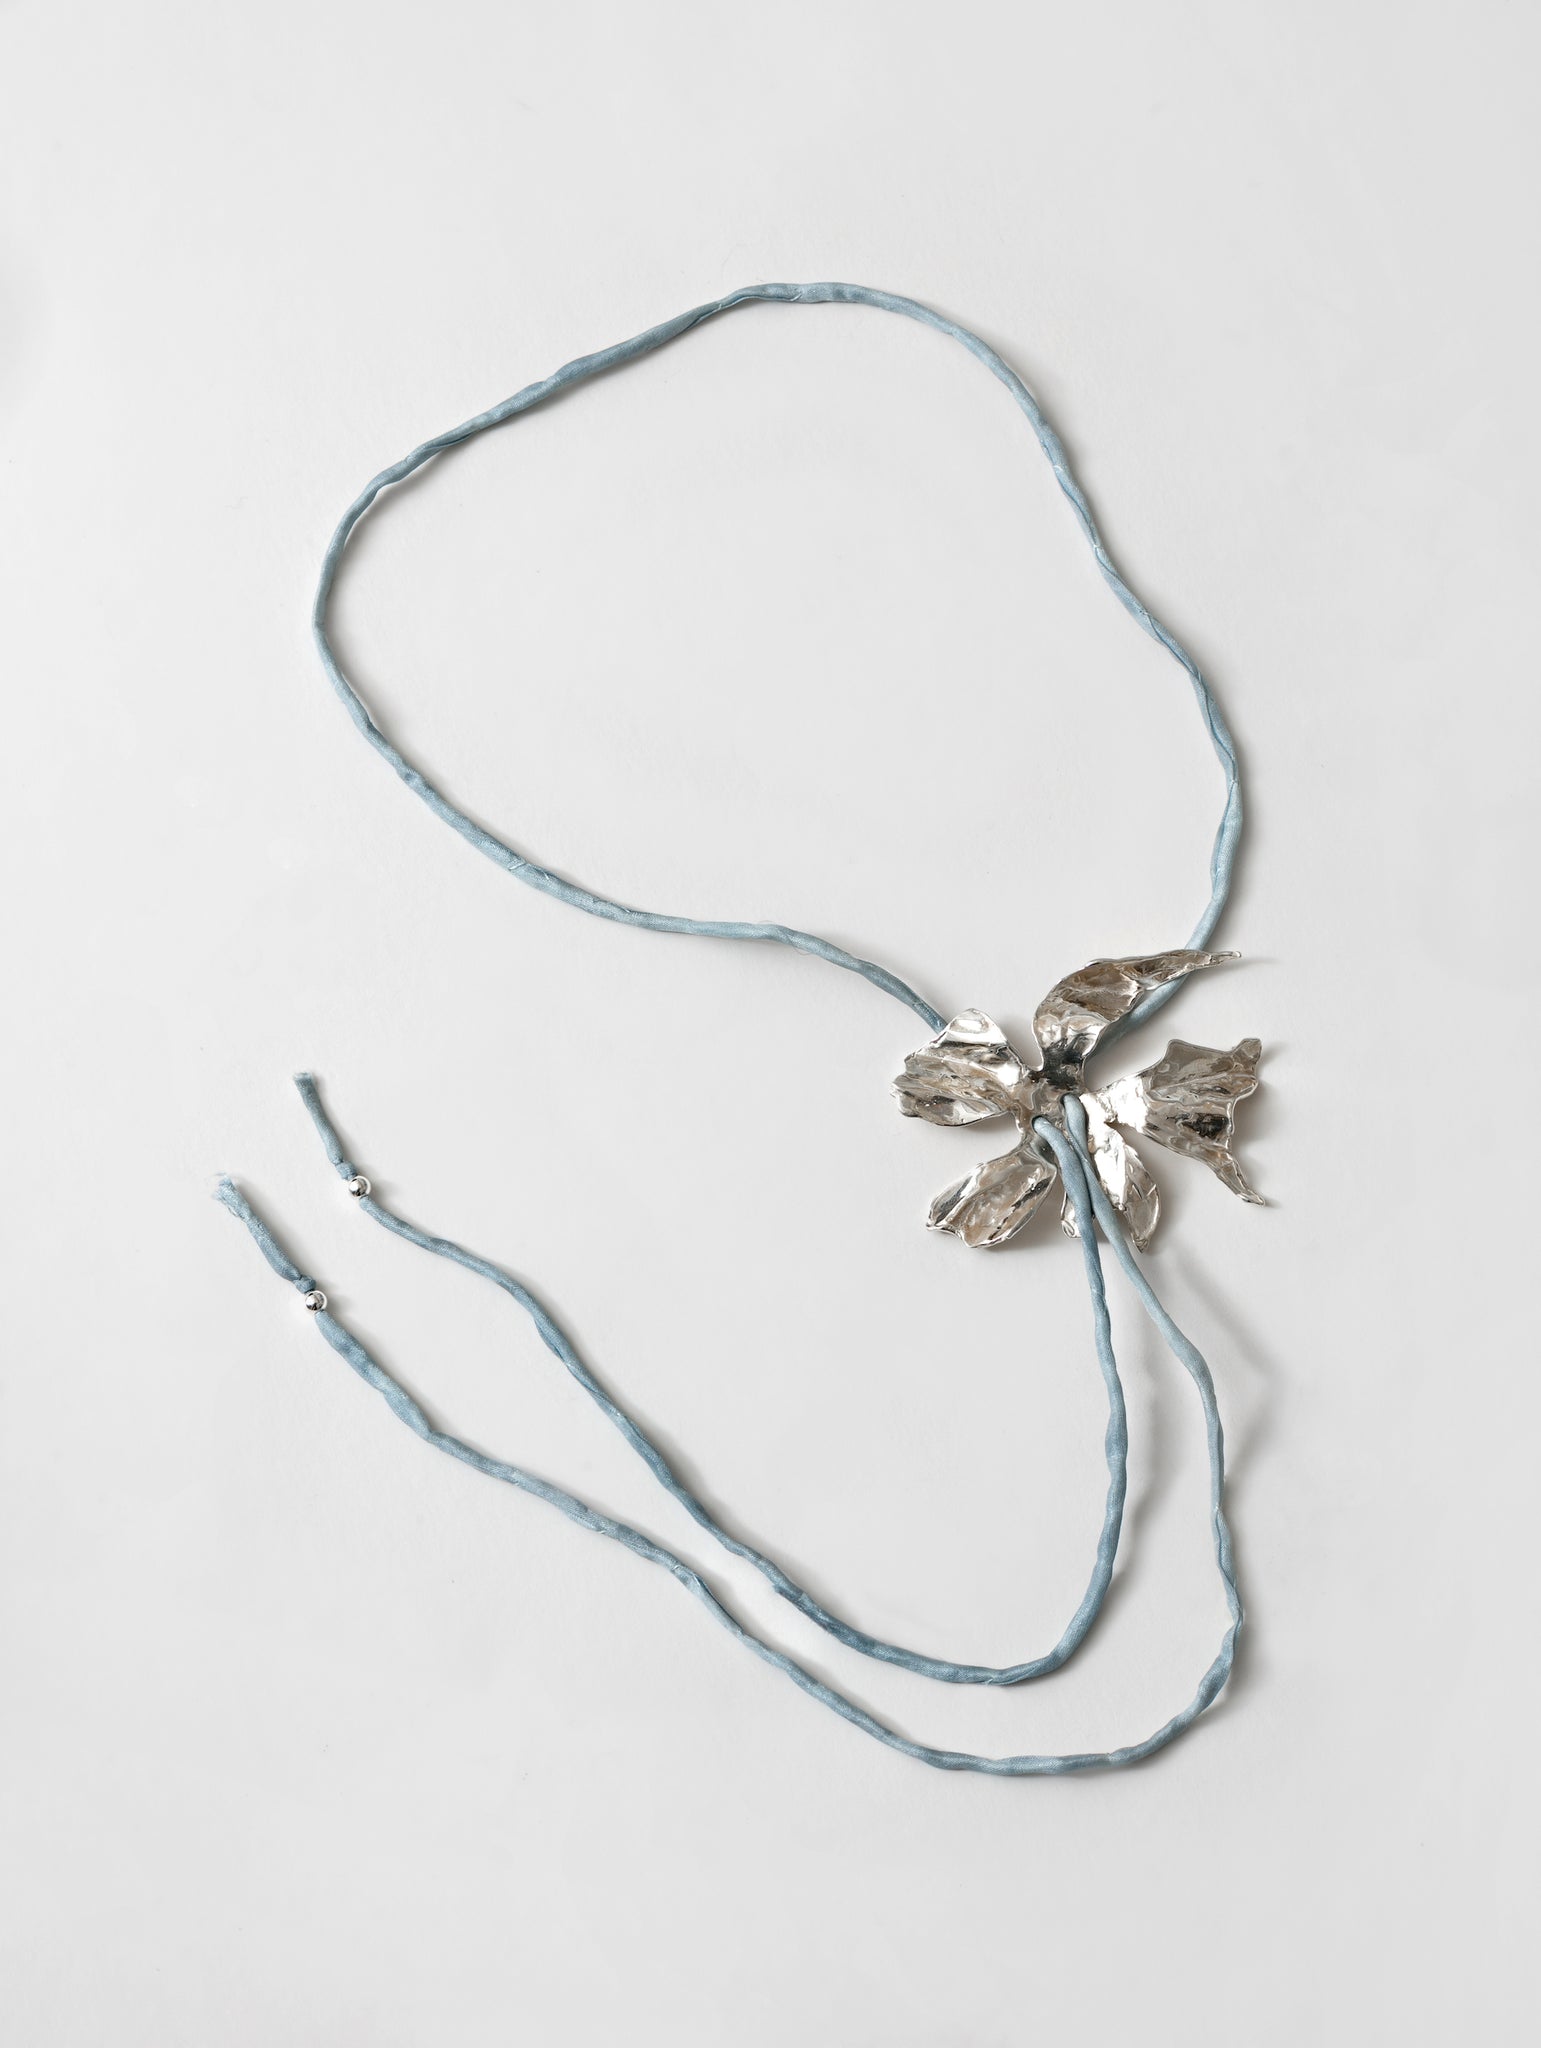 Wolf Circus Flower Silk Cord Necklace in Blue | Silver Plated Flower Pendant Choker-Necklaces-wolfcircus.com